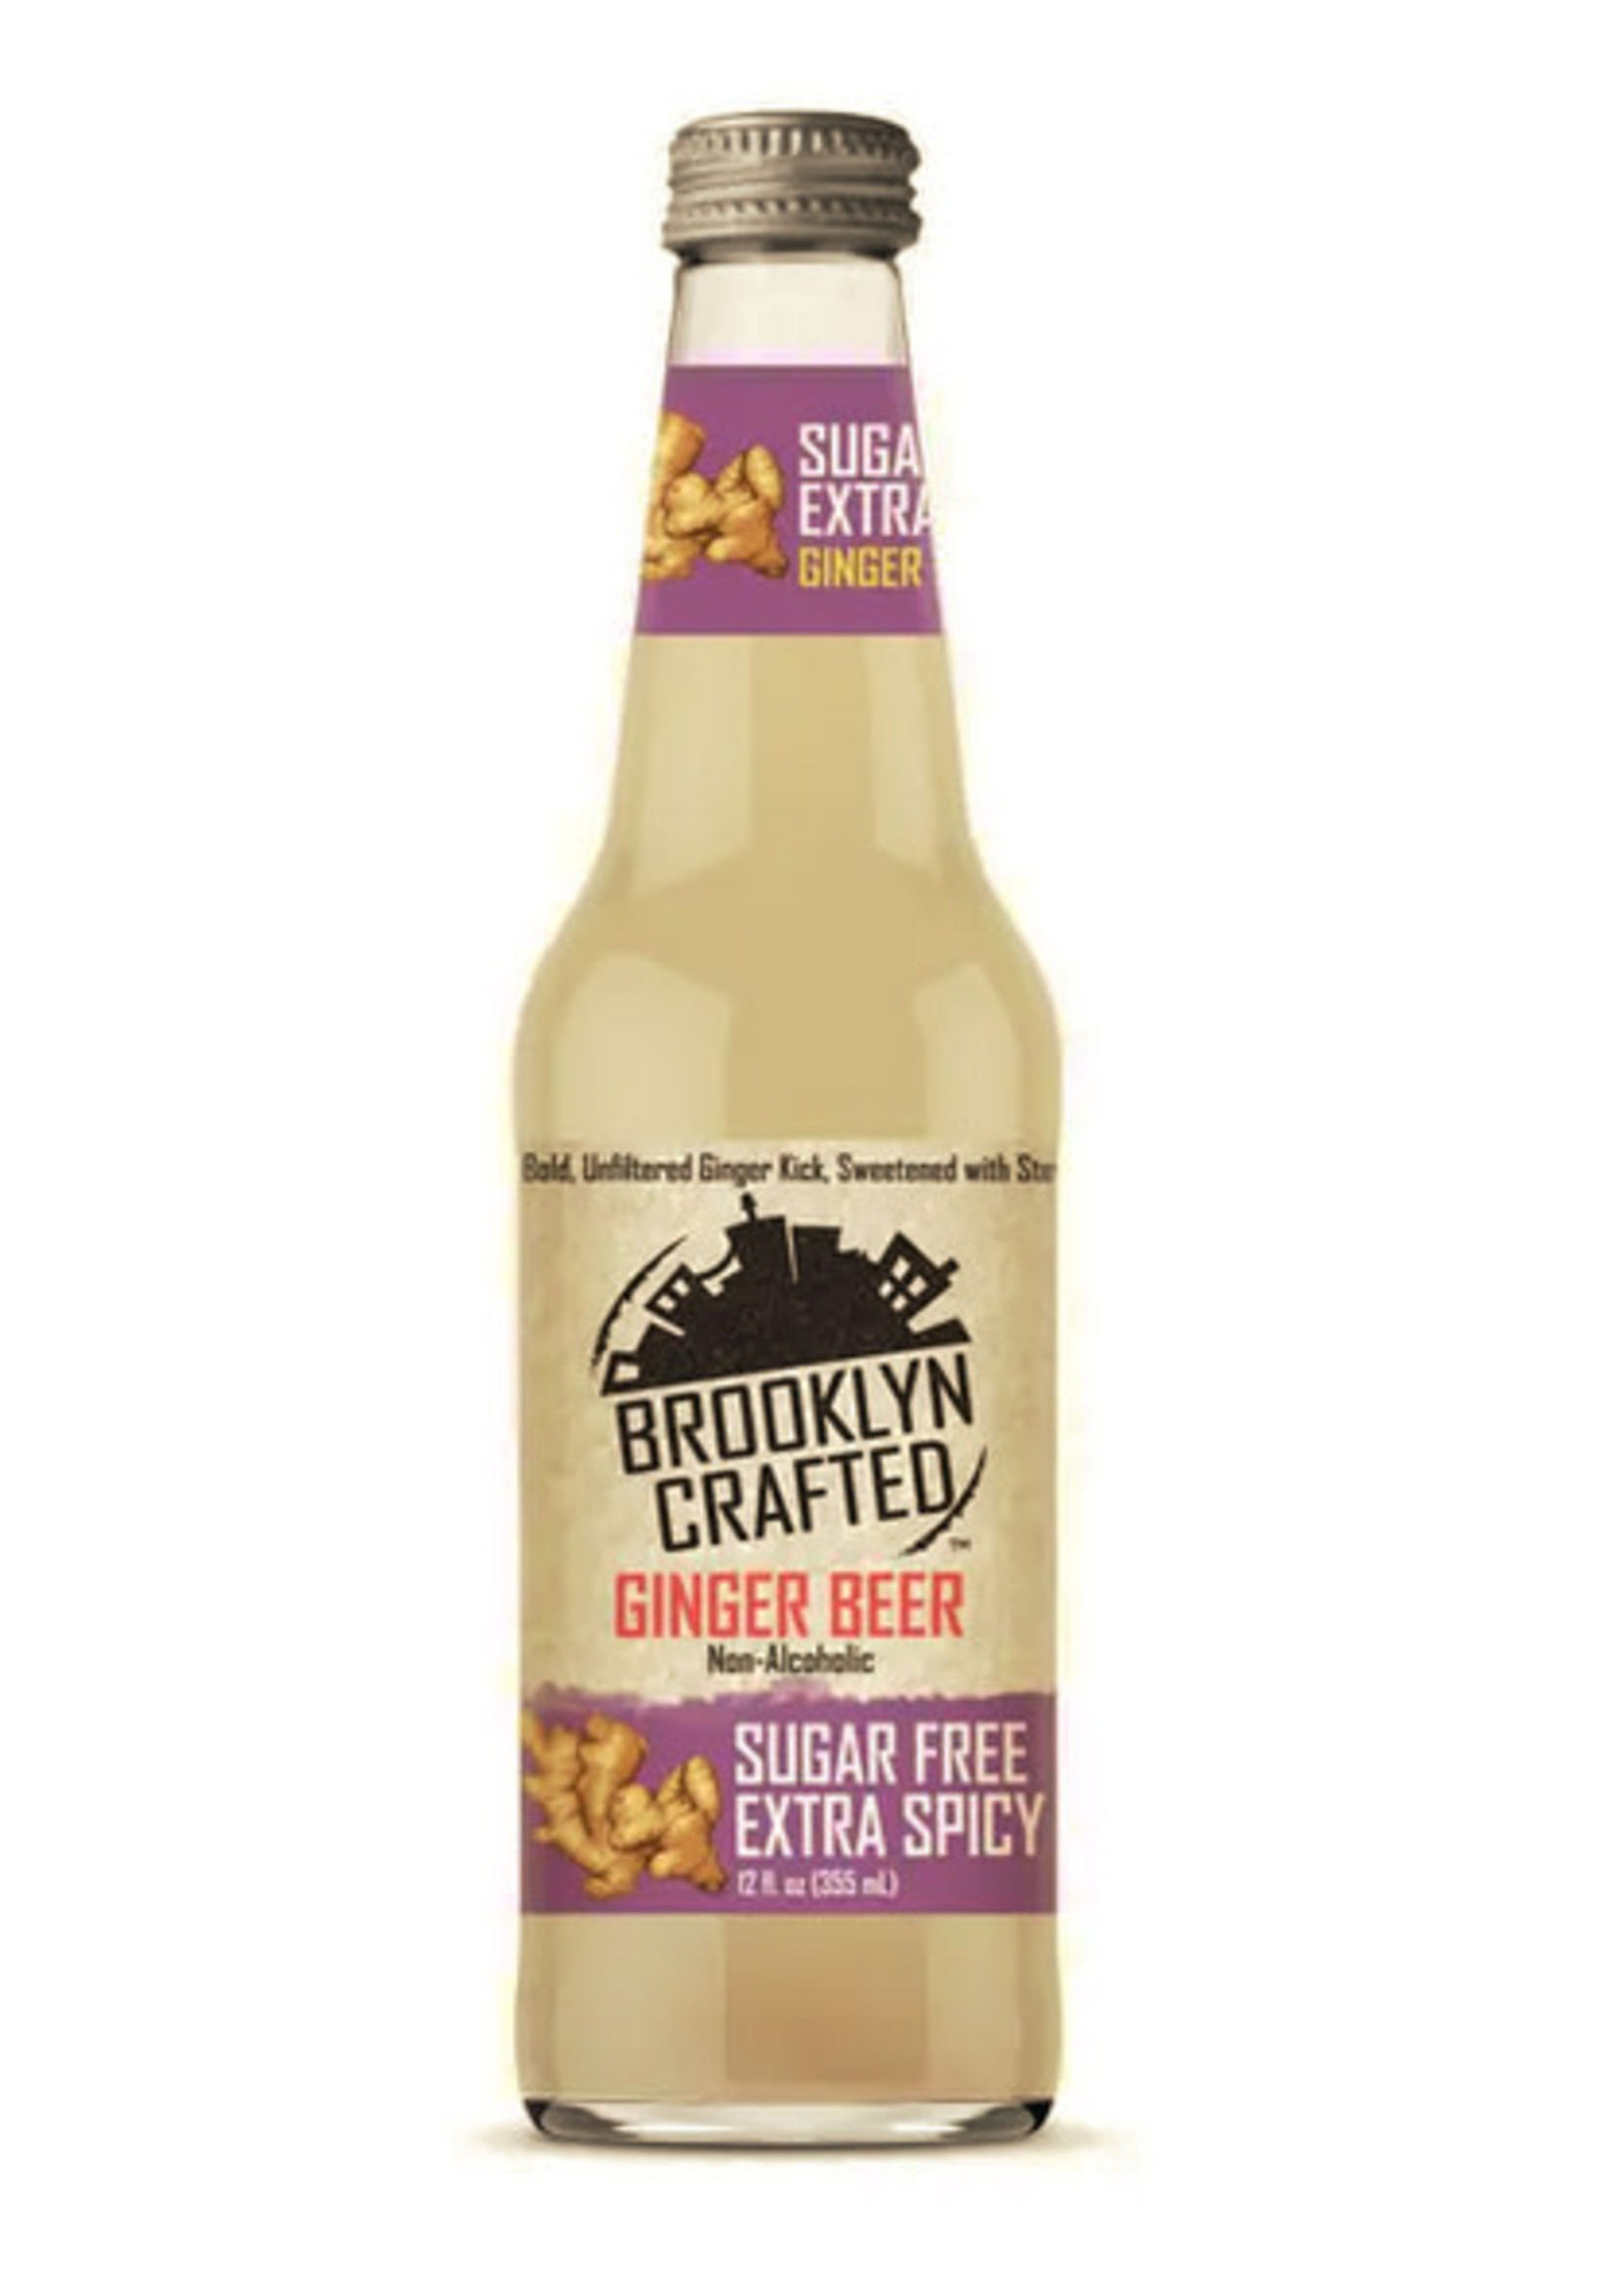 Brooklyn Crafted Brooklyn Crafted, Ginger Beer, Sugar-Free Extra Spicy, 12oz bottle